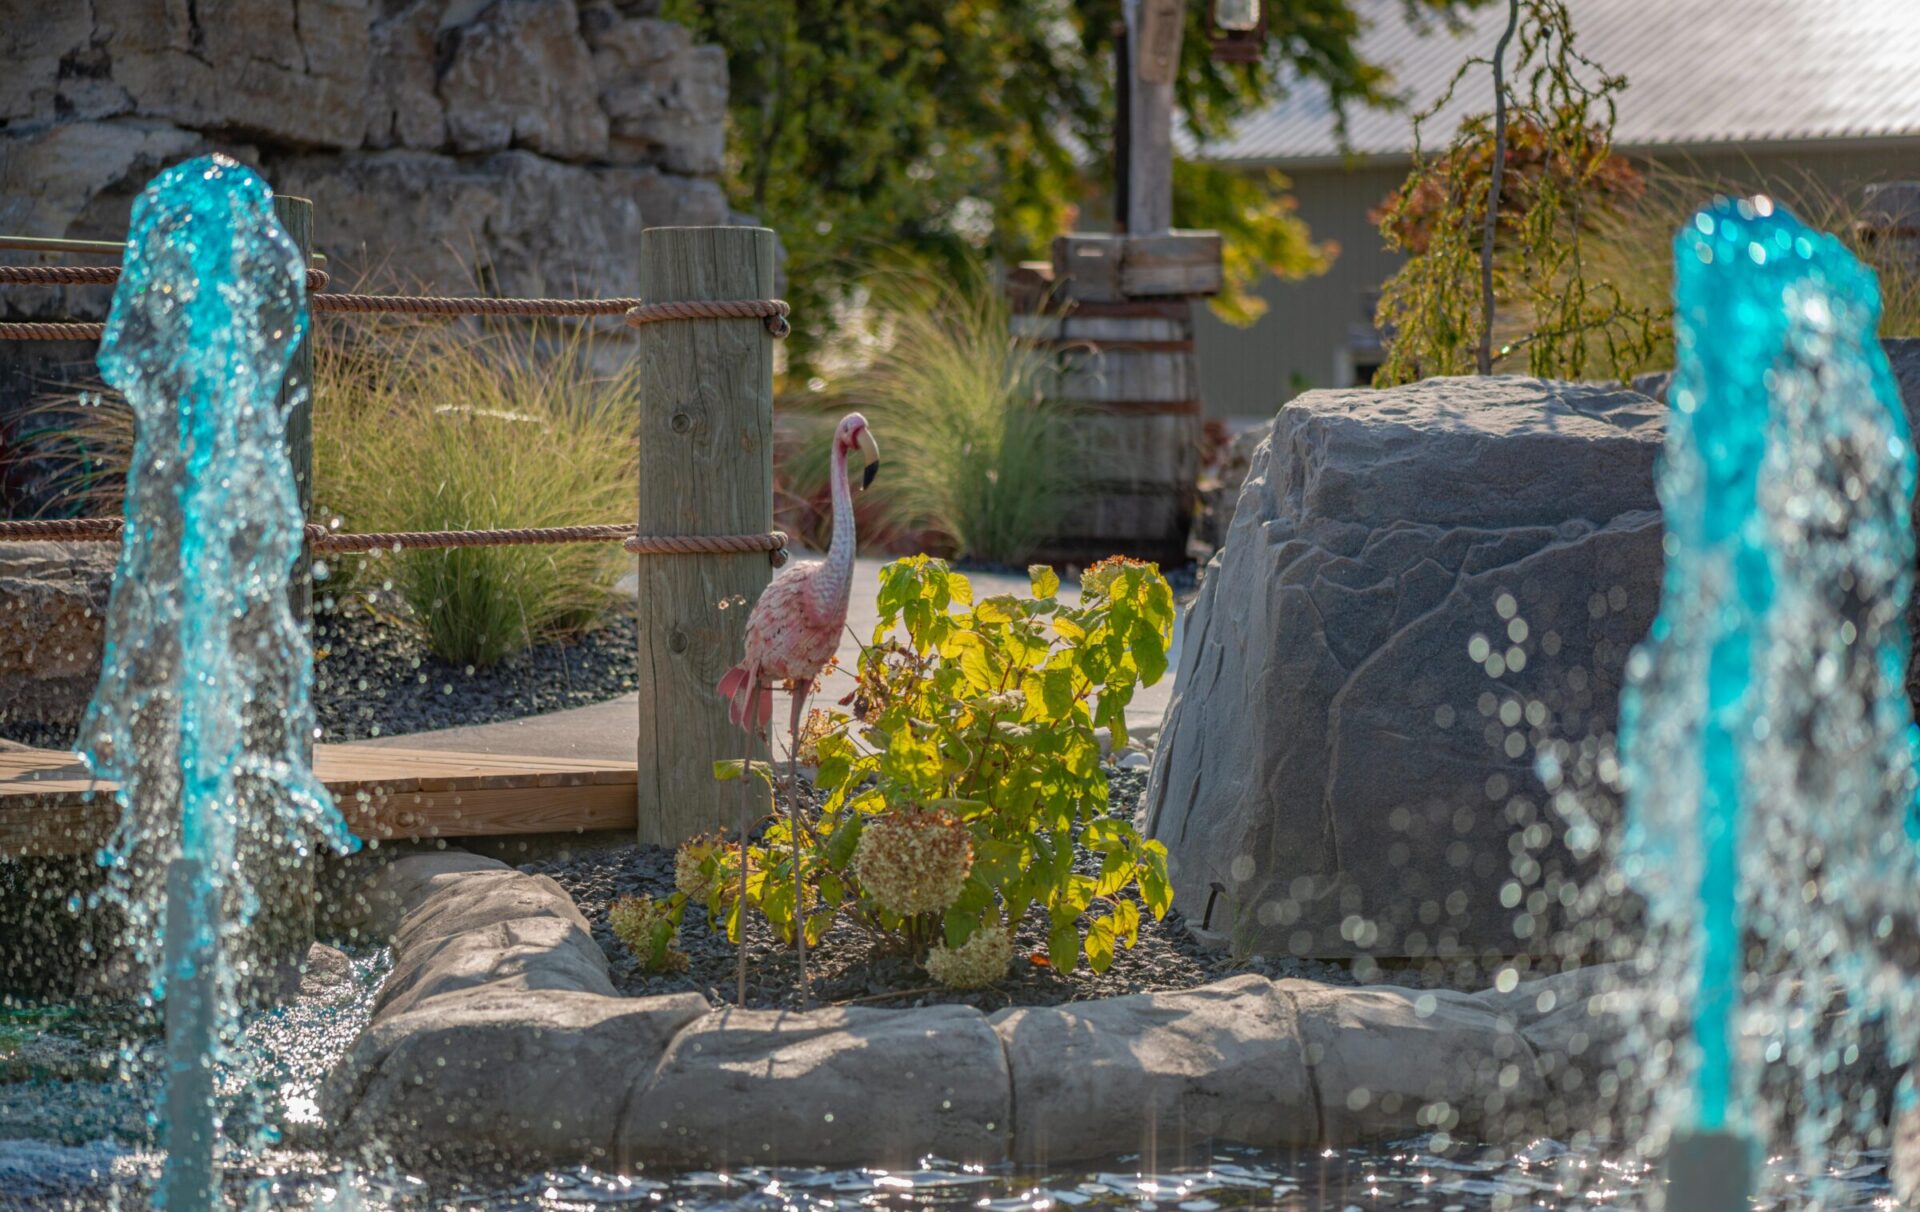 The image shows a vibrant garden setting with water jets, rocks, and a flamingo sculpture amidst green foliage, under a clear, sunny sky.